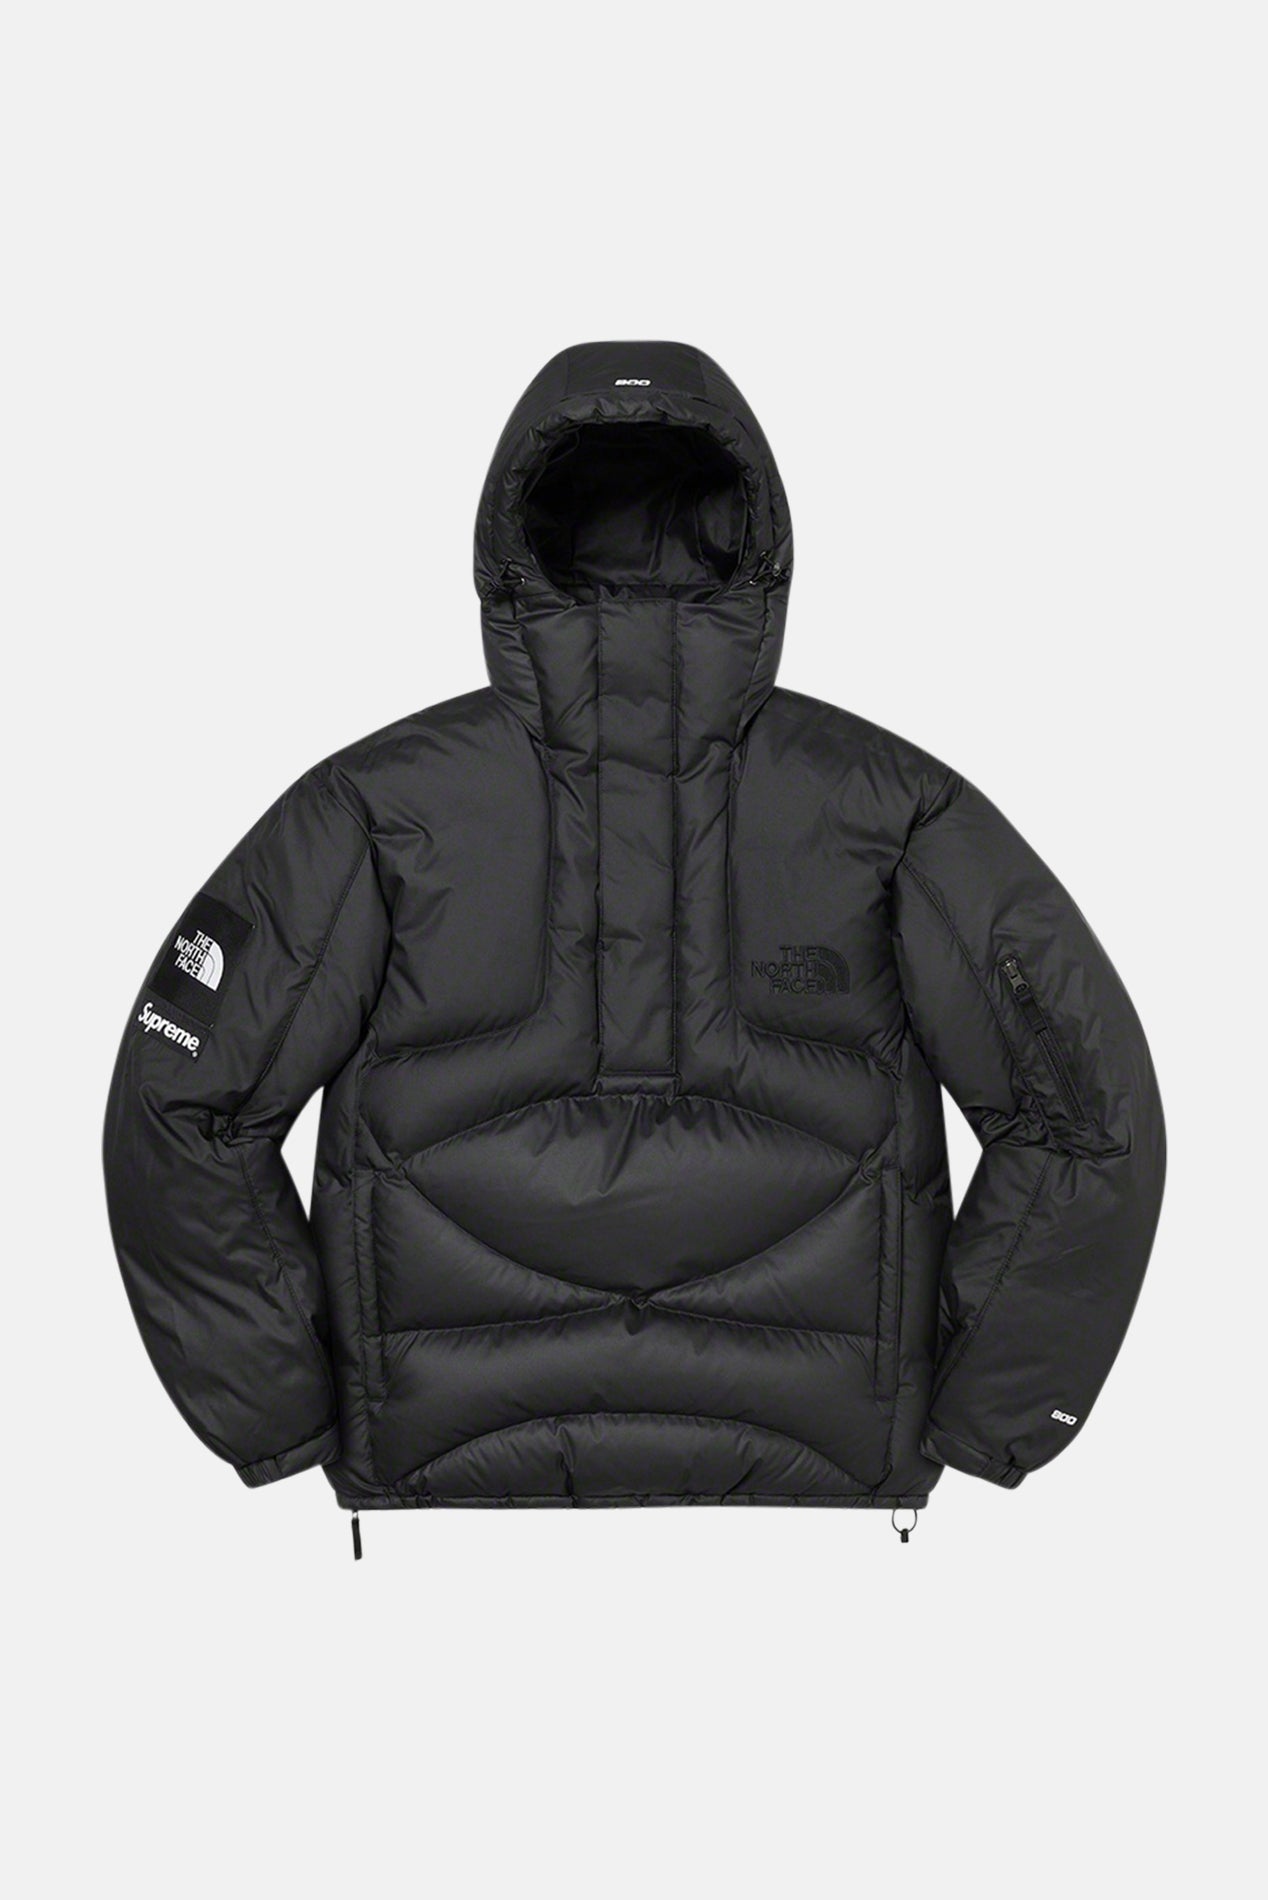 Supreme x The North Face 800-Fill Half Zip Hooded Pullover